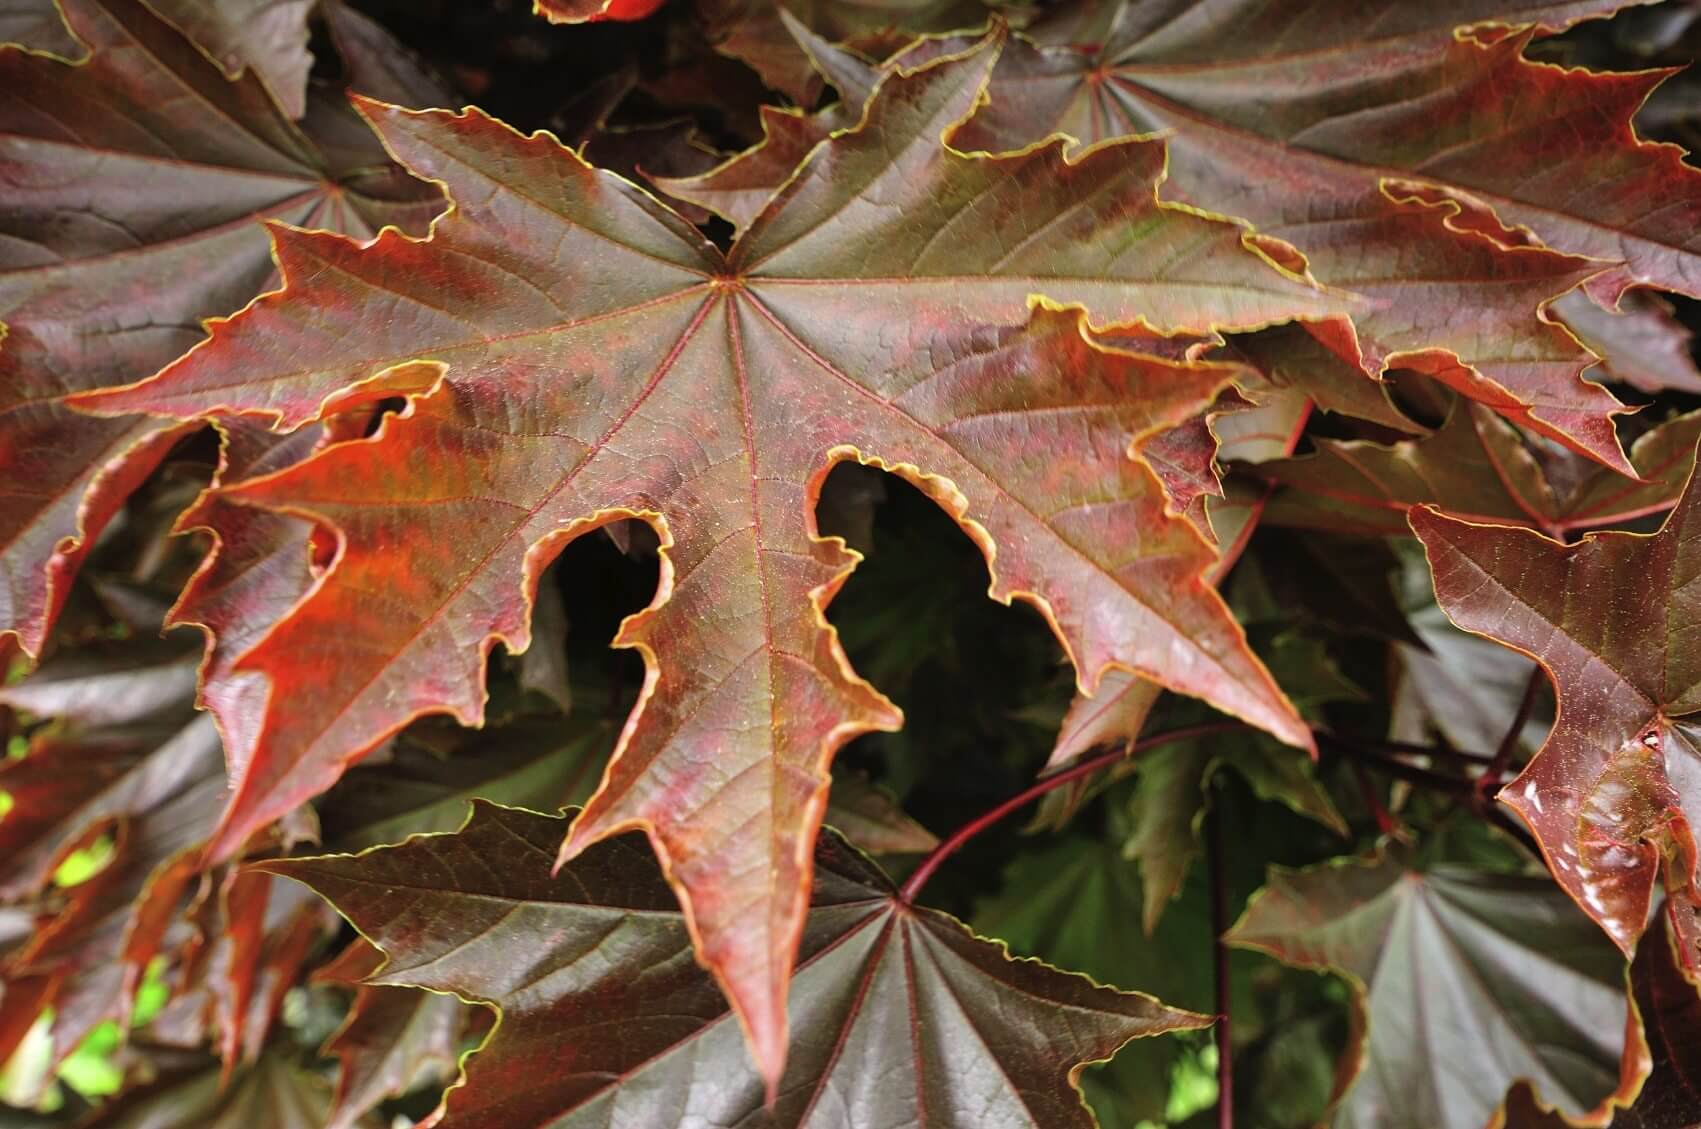 Maple Trees: Types, Leaves, Bark – Identification Guide (Pictures) 